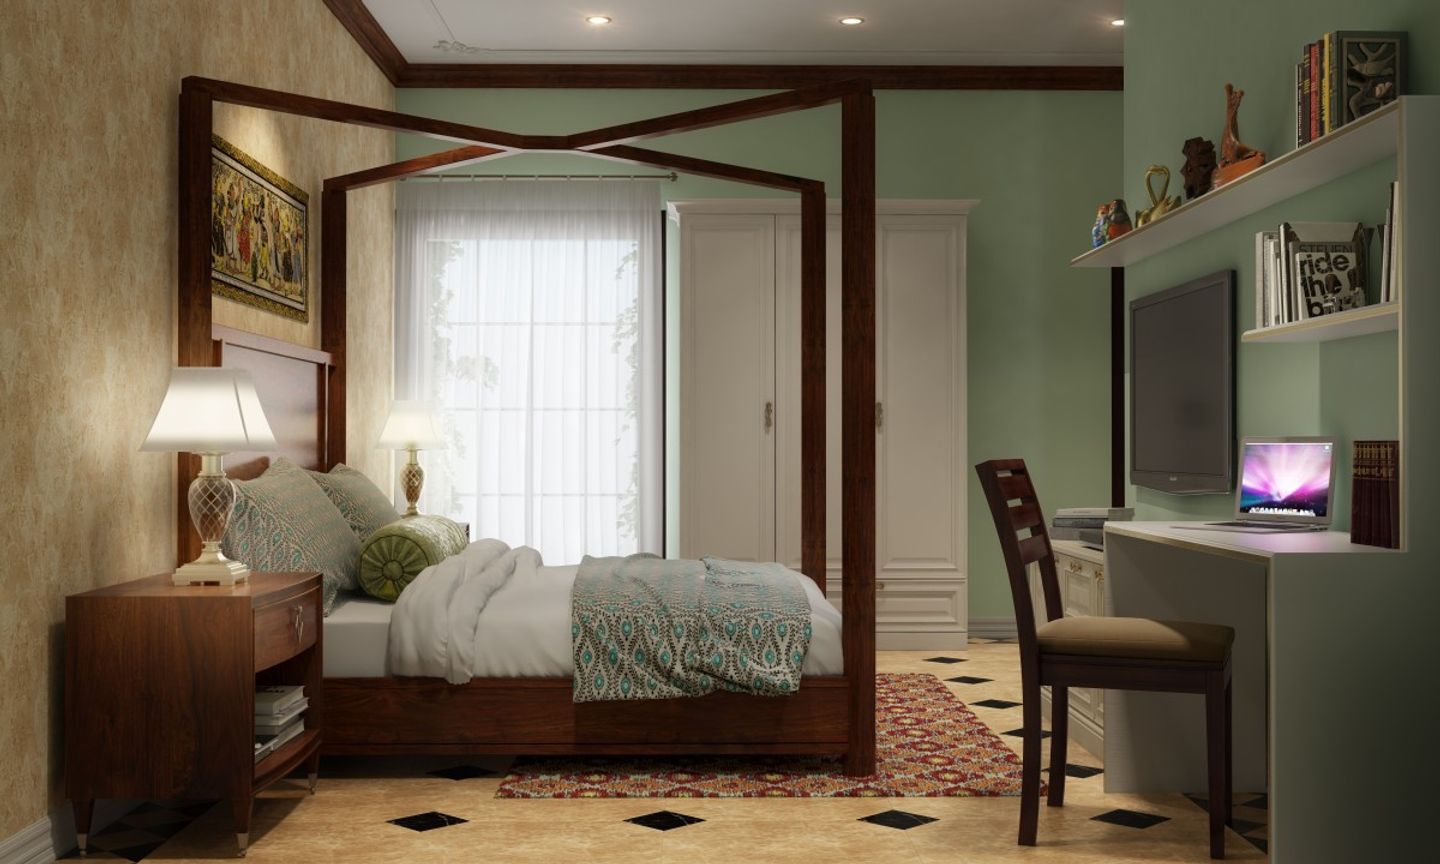 Classic Convenience Max Bedroom Design With Tiles